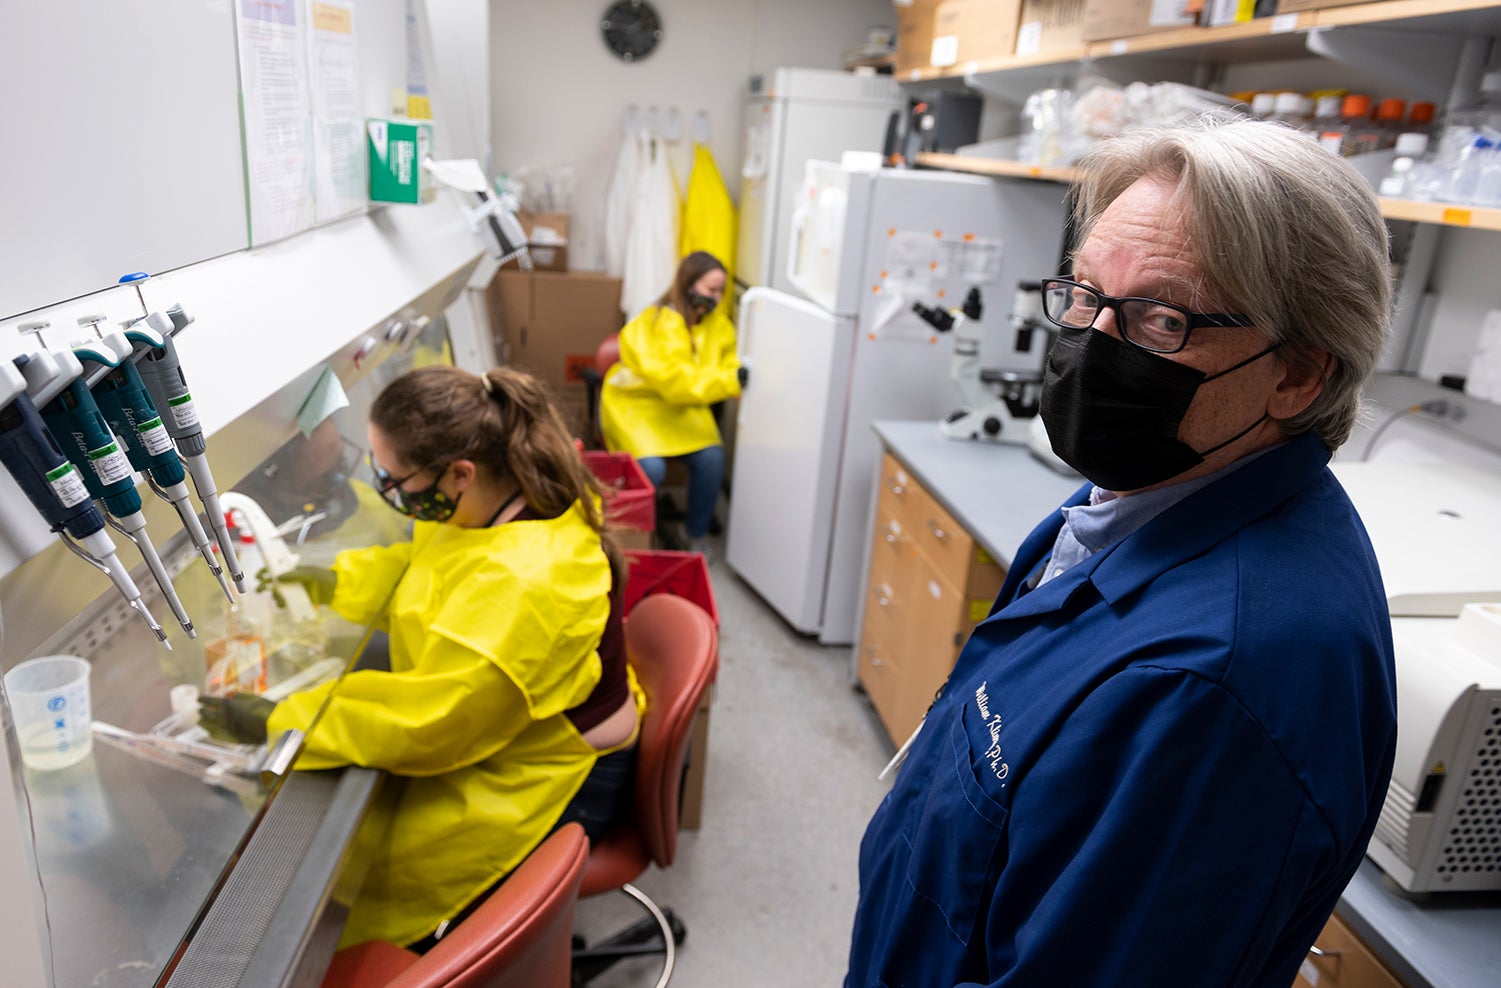 white man wearing glasses, mask, and Navy blue lab coat stands in lab and looks at camera while two women wearing masks, black gloves and yellow protective smocks work in background.